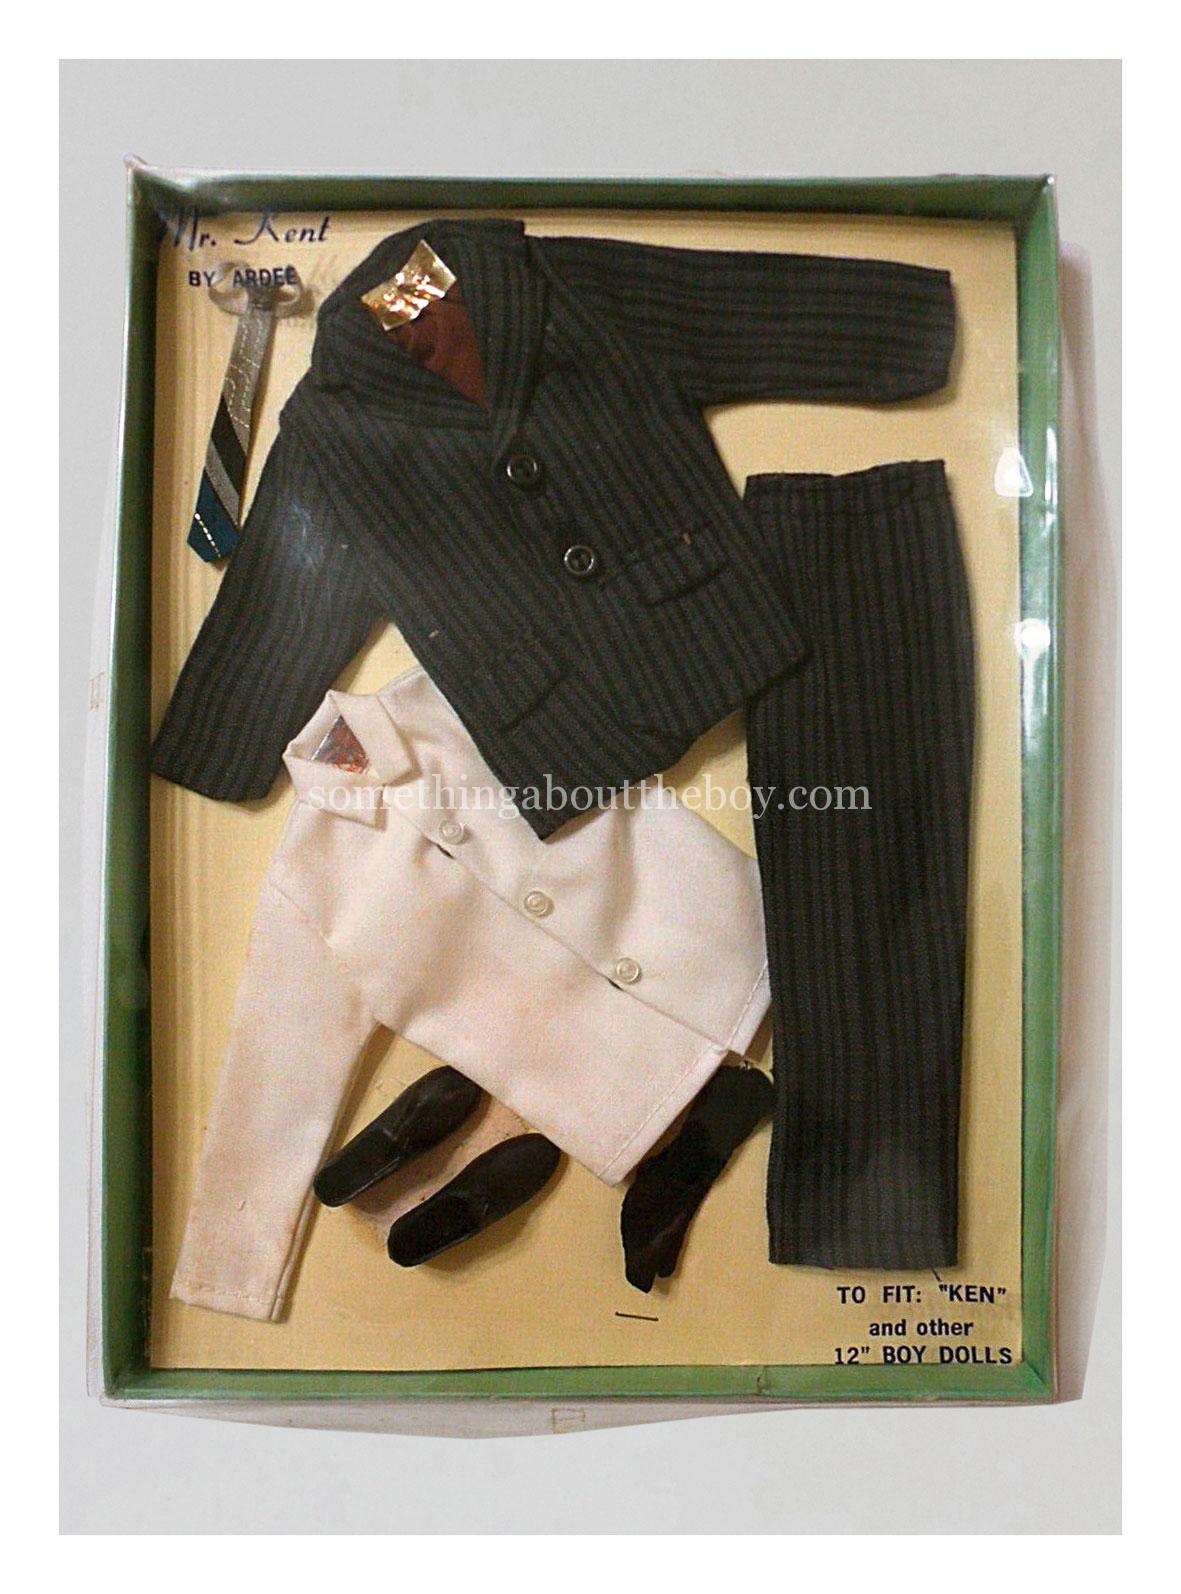 Mr. Kent Business Suit by Ardee